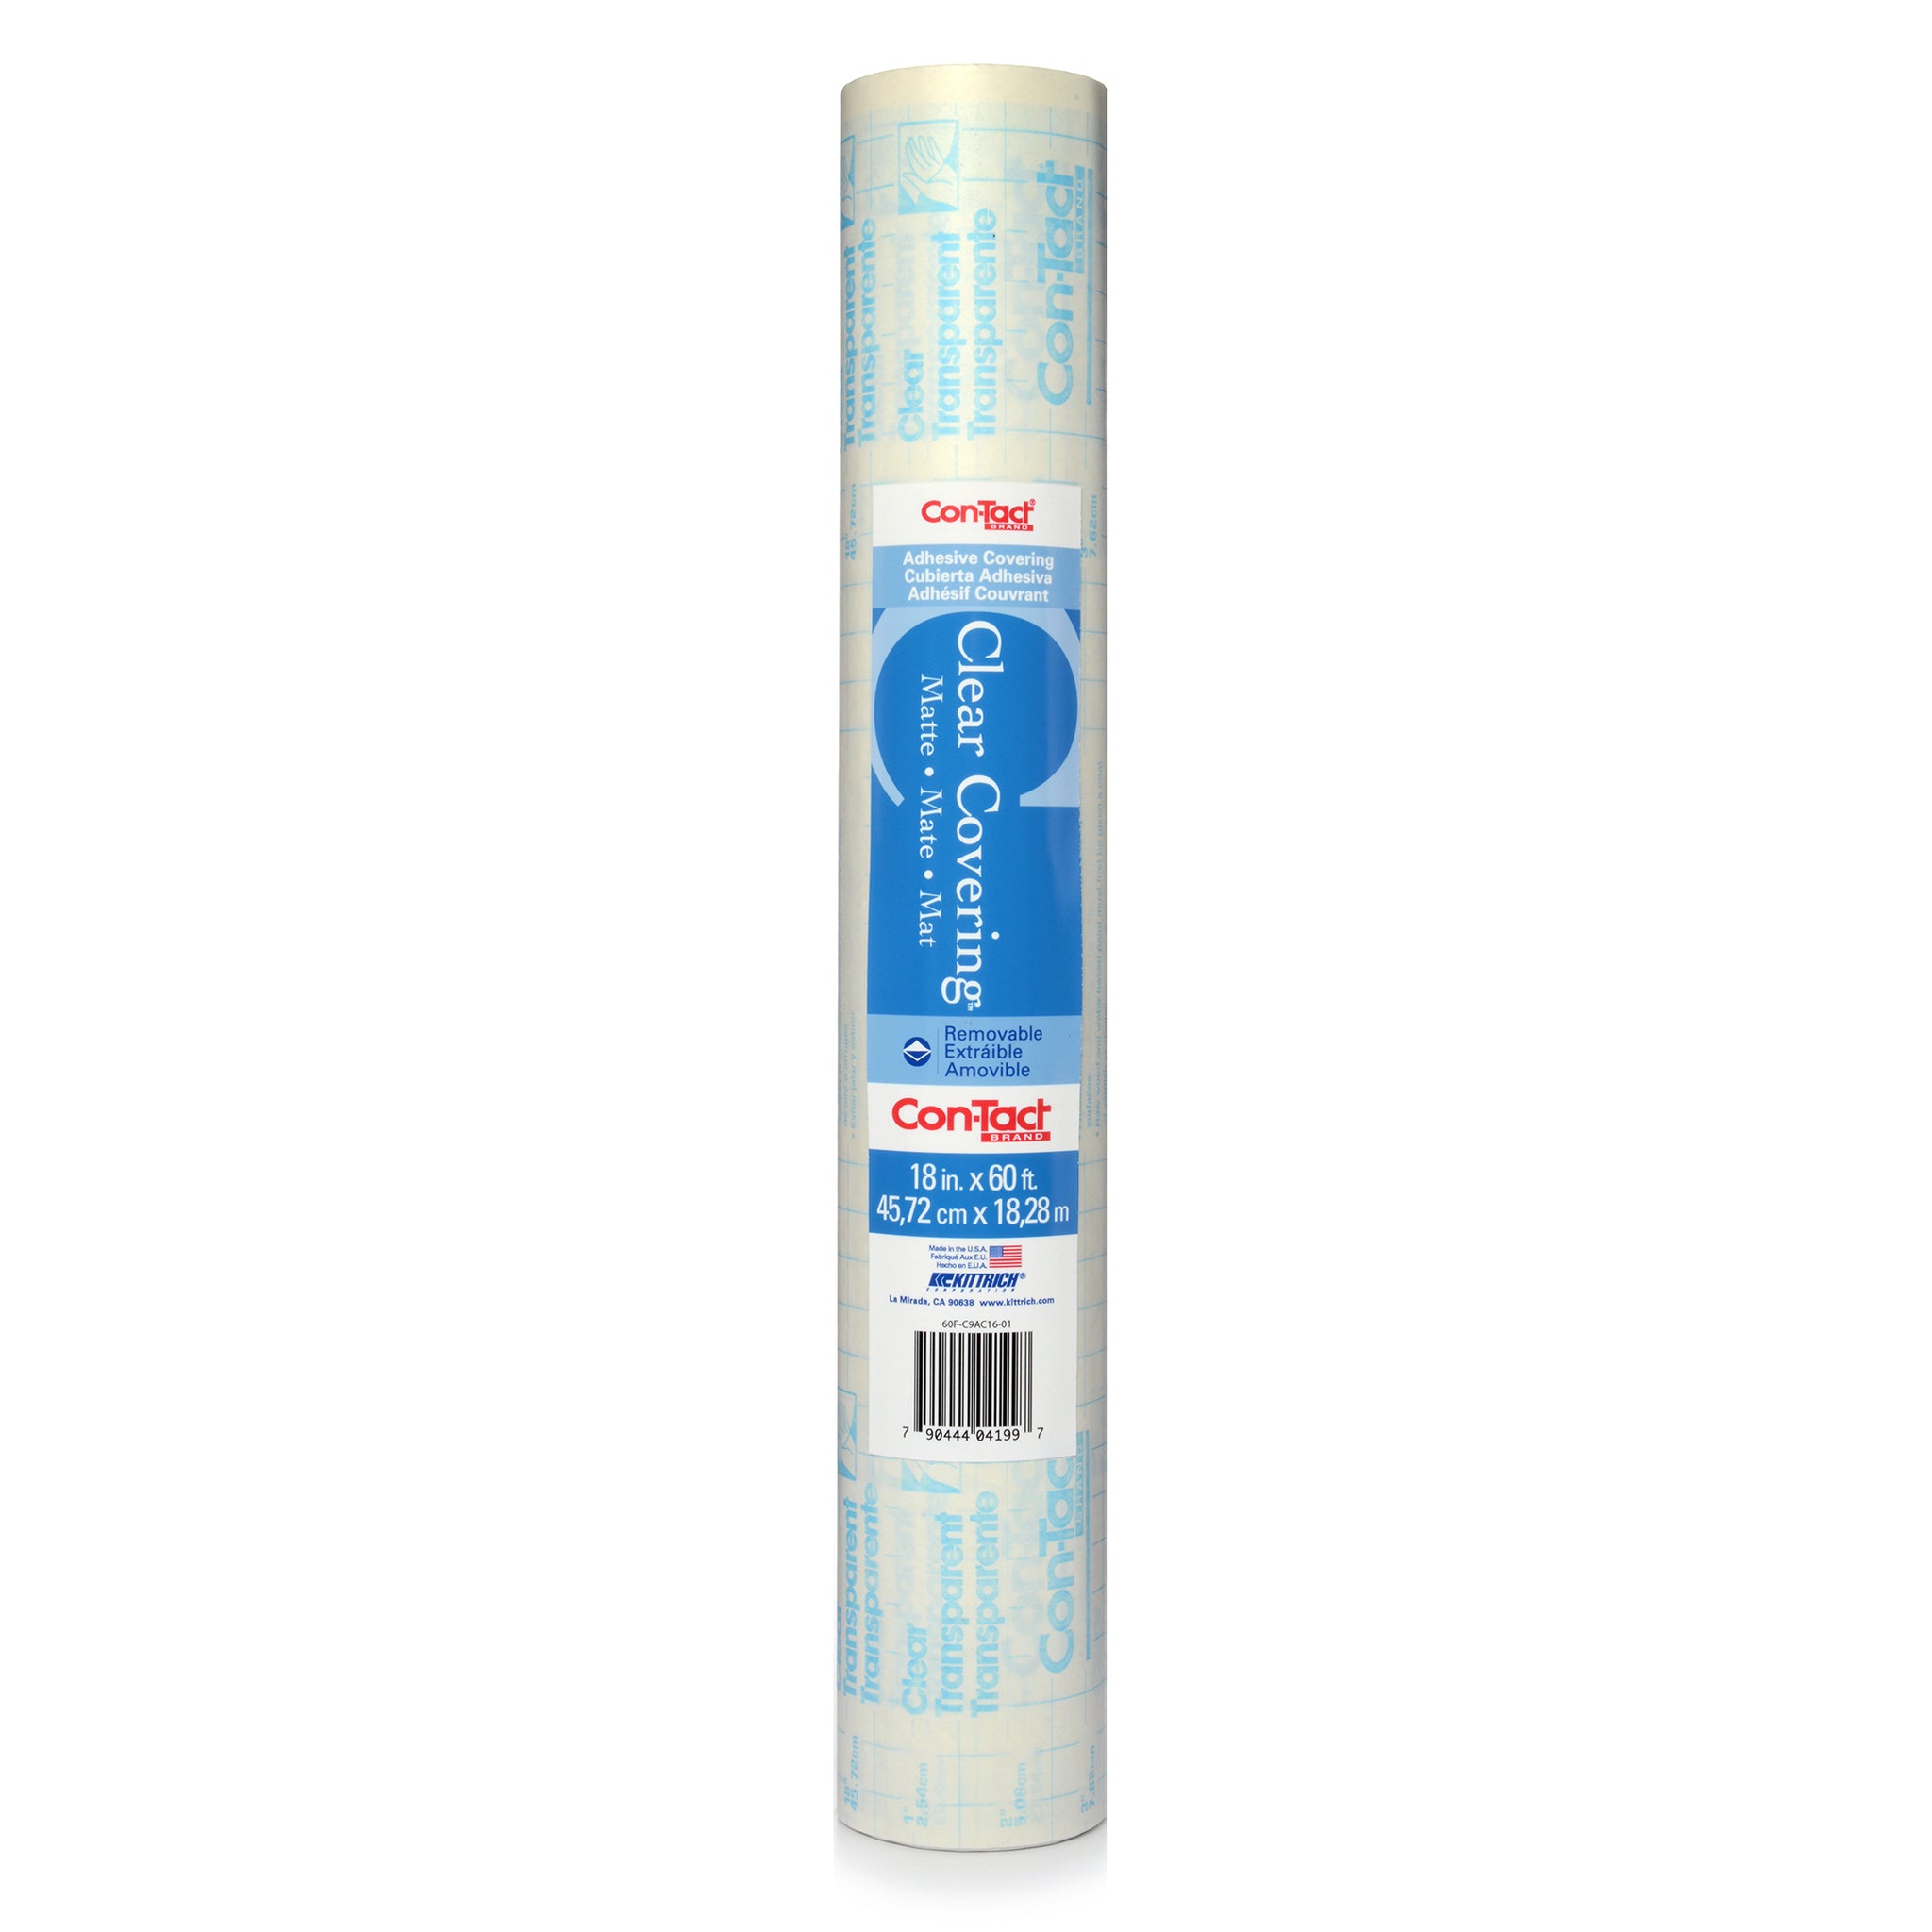 Frosty™ Diamond Clear Self-Adhesive – Con-Tact Brand